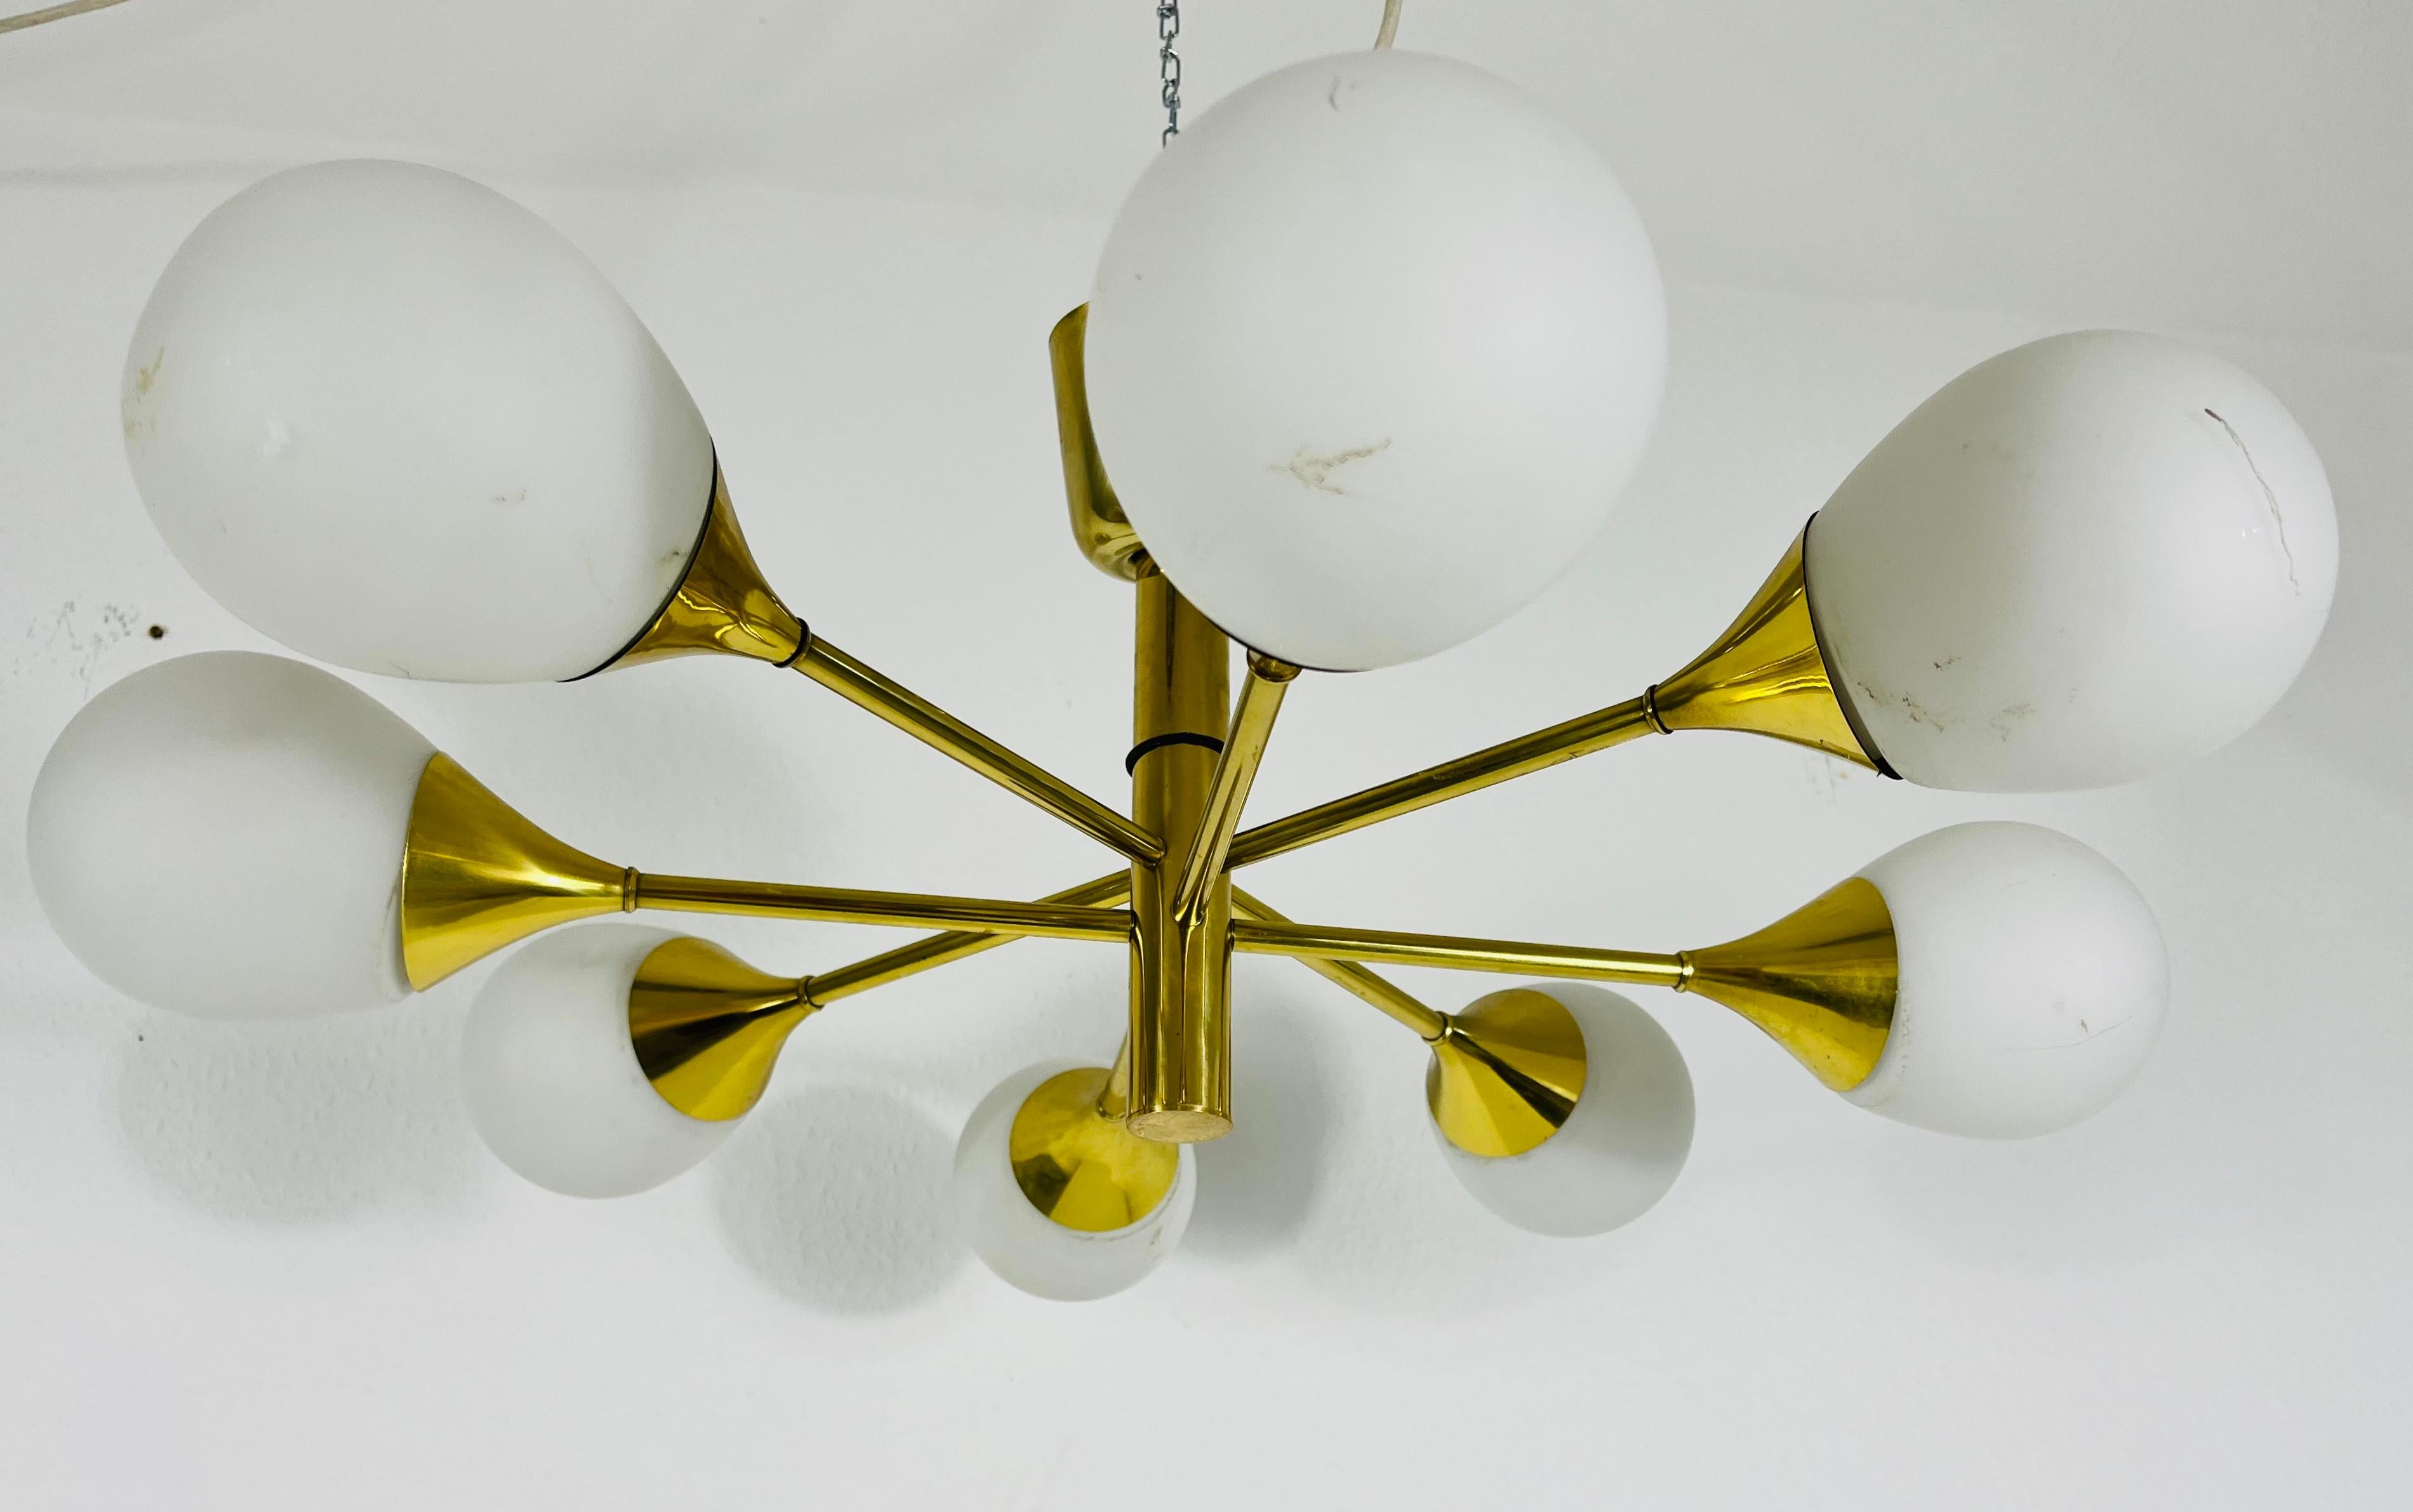 A midcentury chandelier by Kaiser Leuchten made in Germany in the 1960s. It is fascinating with its Space Age design and eight opaline glass balls. The circular body of the light is made of polished brass, including the arms. 

Good vintage